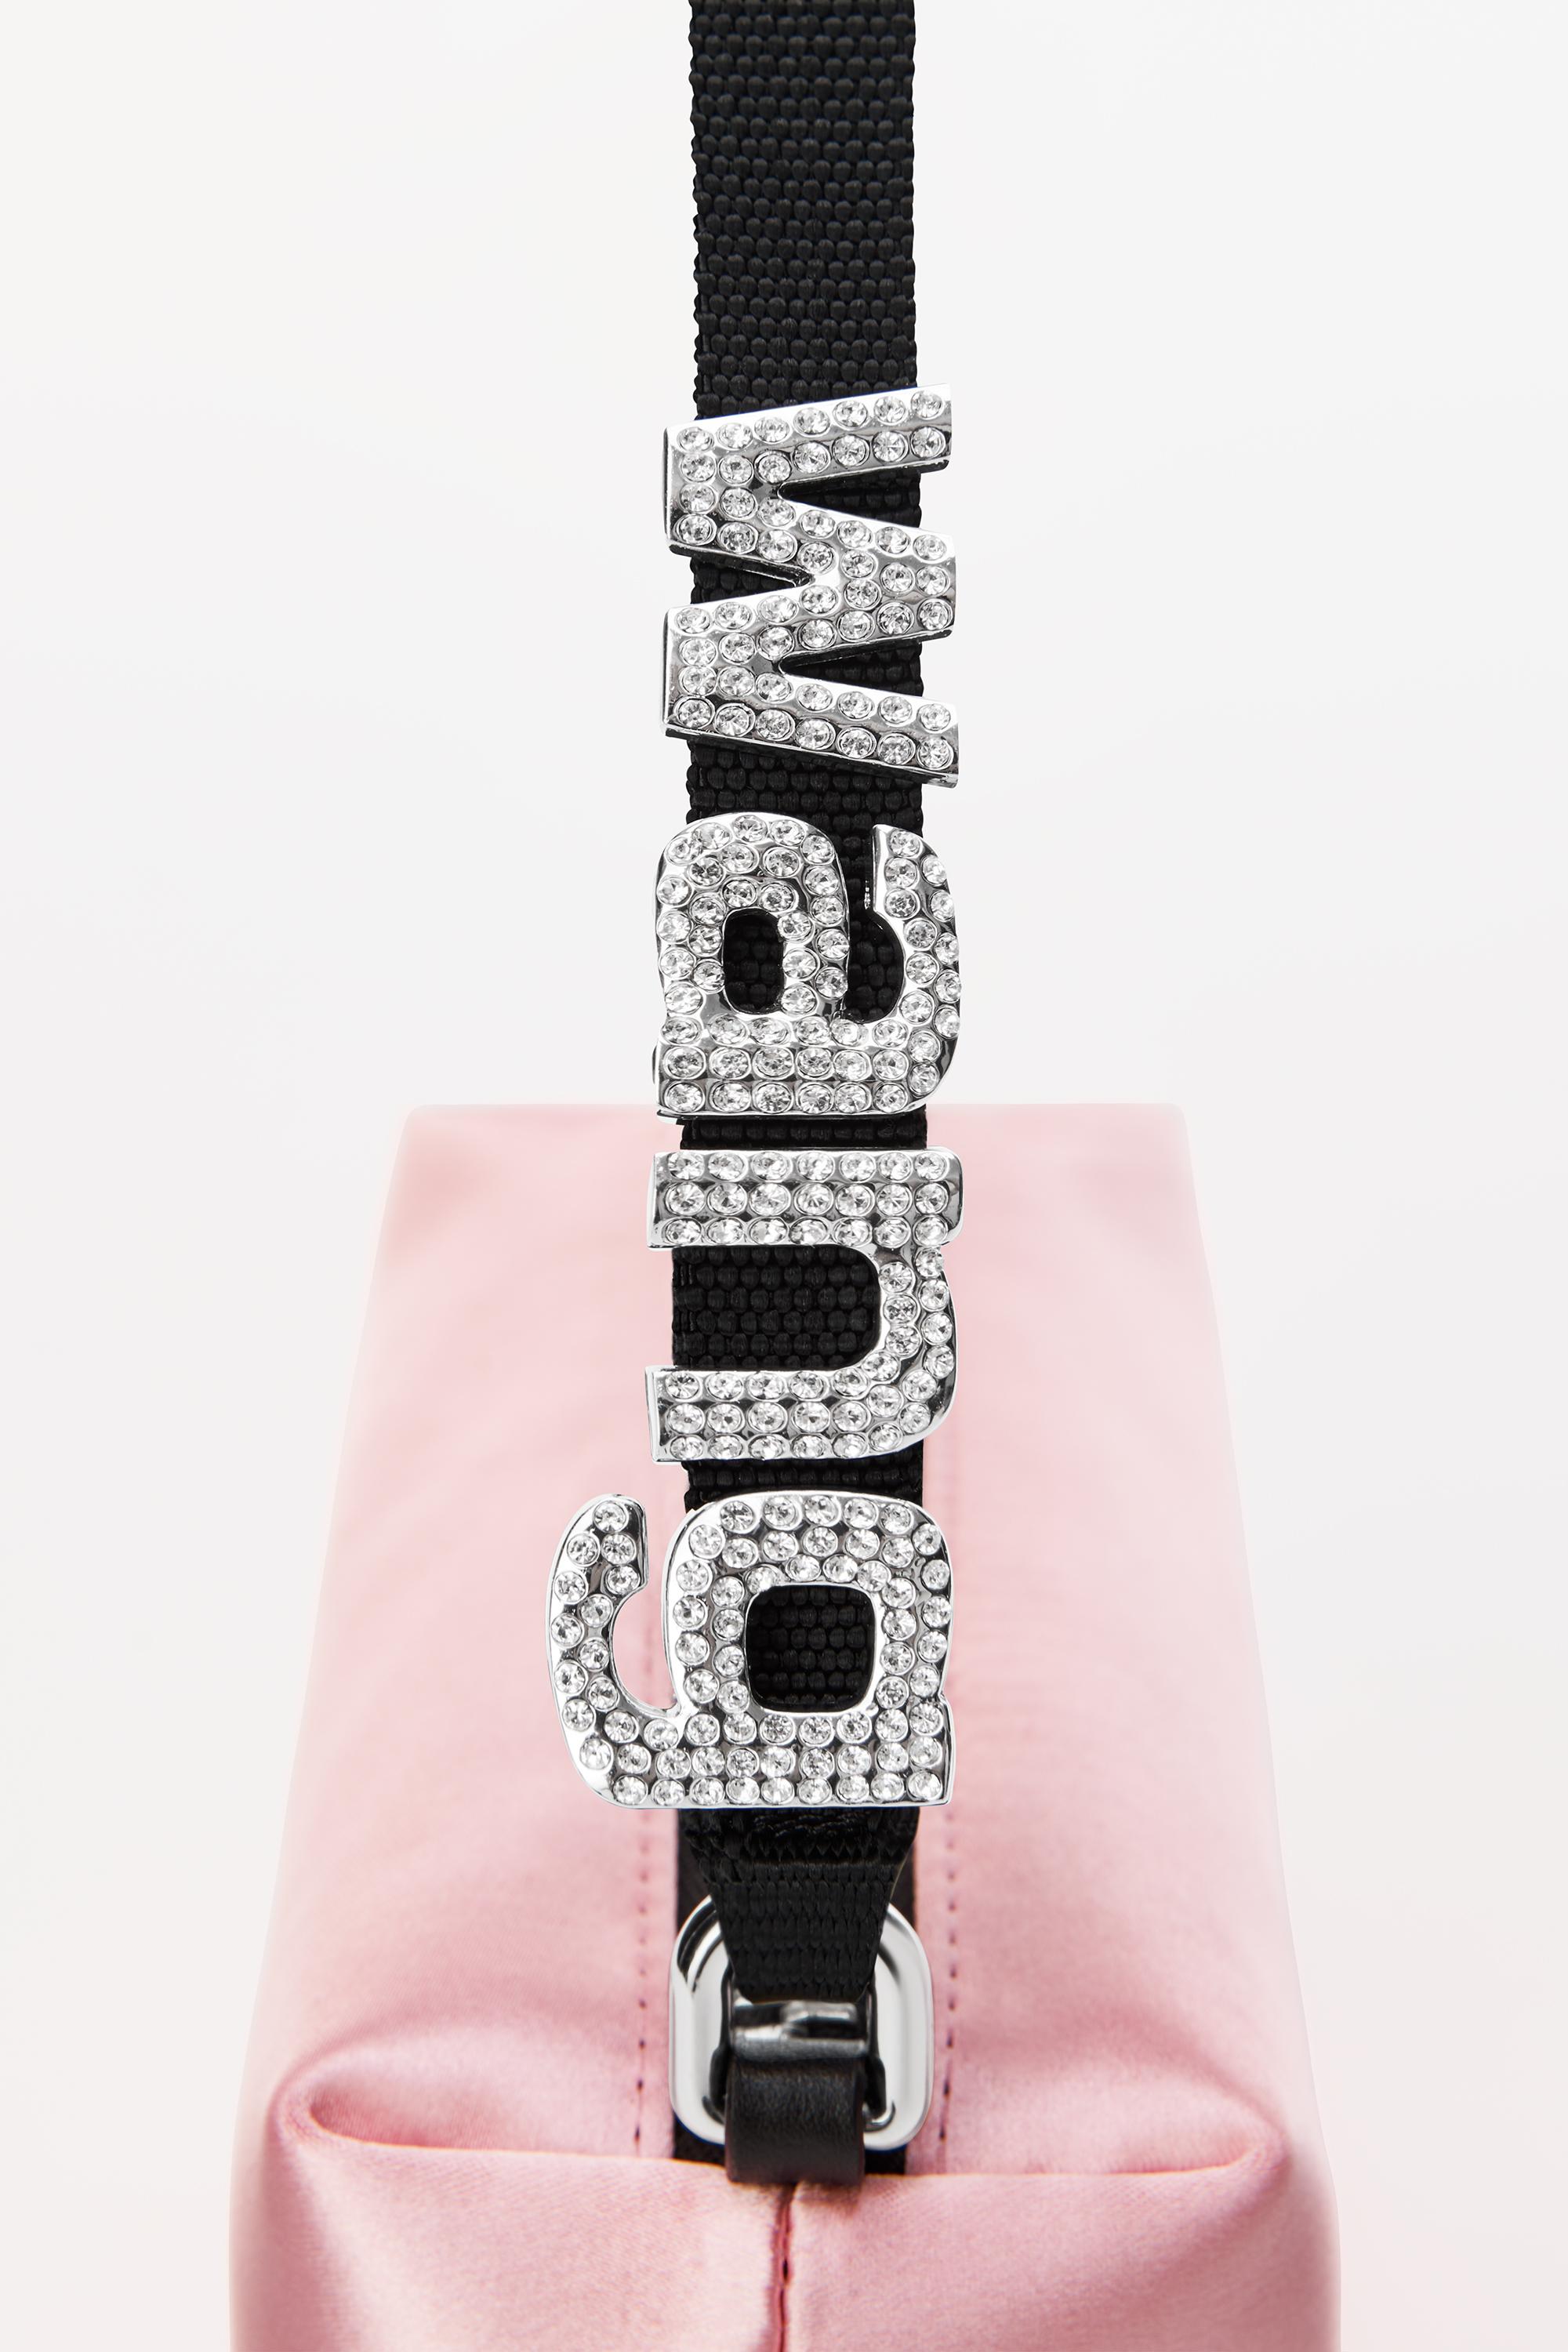 A dupe for the Alexander Wang Heiress Rhinestone Pouch! This one